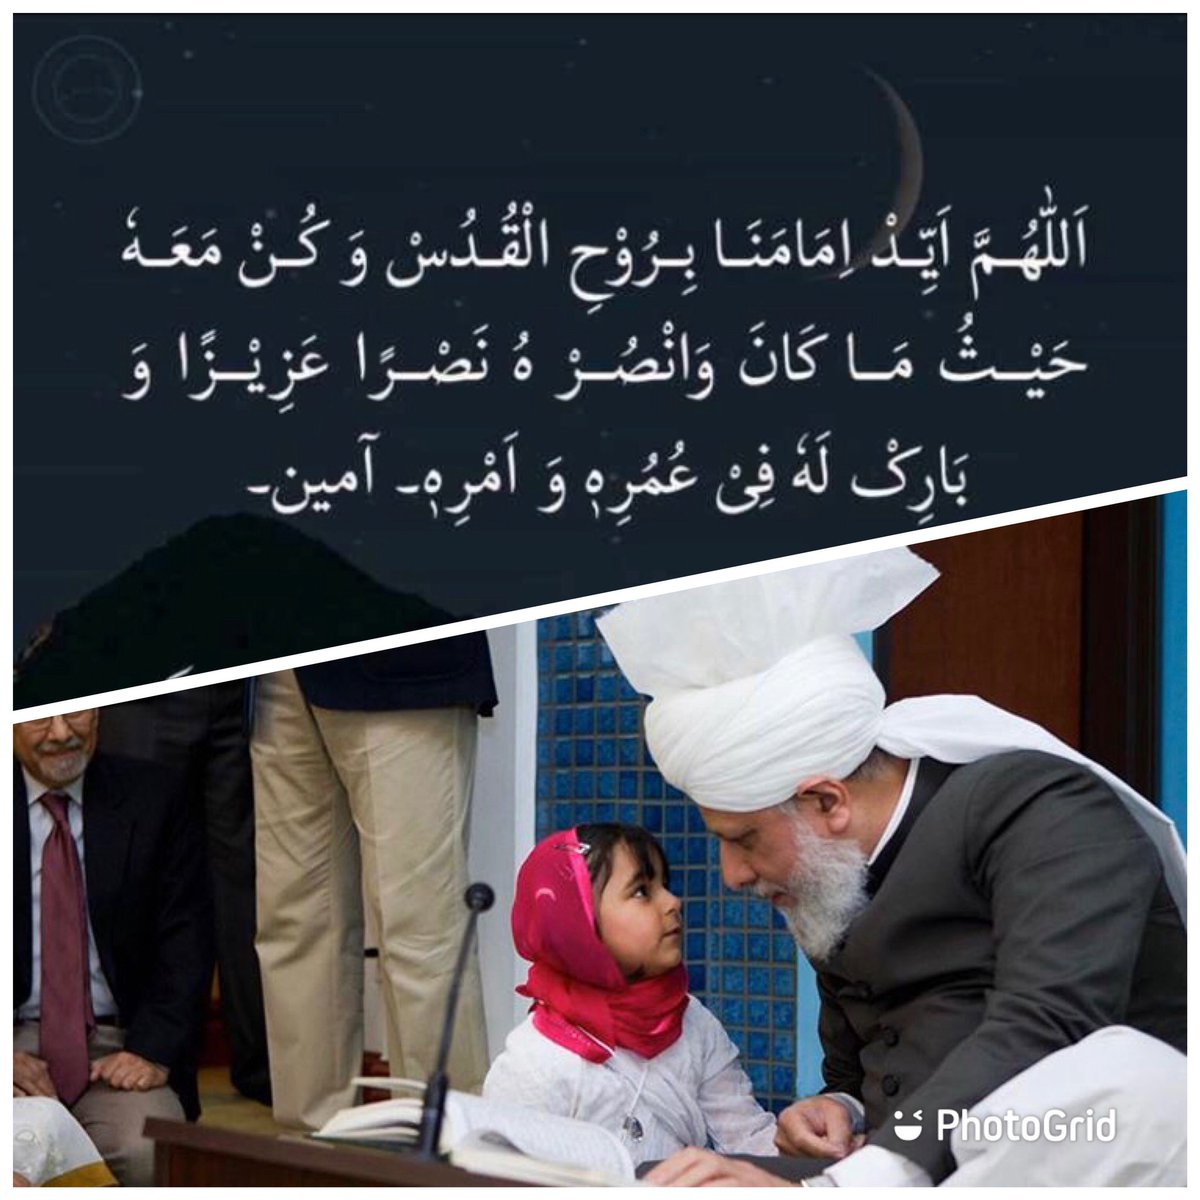 Pray for the one who does not forget to pray for you 
#nolifewithoutkhilafat
#love4all
#huzoor
#ahmadiyyat